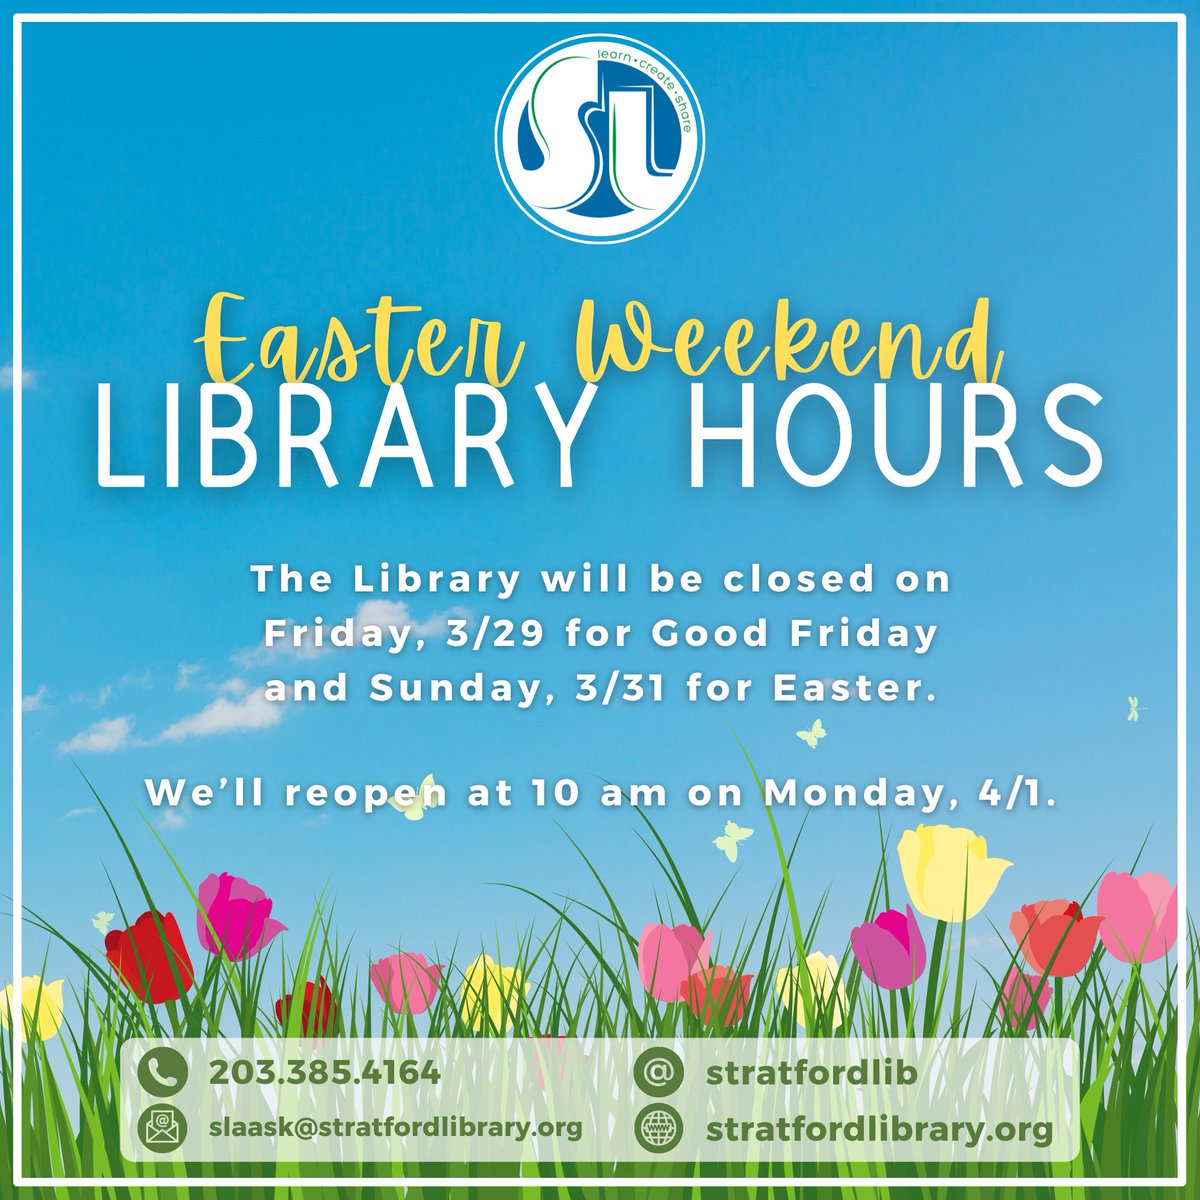 Happy Easter to all who celebrate! The Library will be closed tomorrow (3/29) for Good Friday, open 10 am - 5 pm on Saturday, and closed Sunday (3/31) for Easter. We'll reopen at 10 am on Monday, 4/1. Have a great weekend!

#Easter2024 #holidayhours #StratfordLibrary #StratfordCT